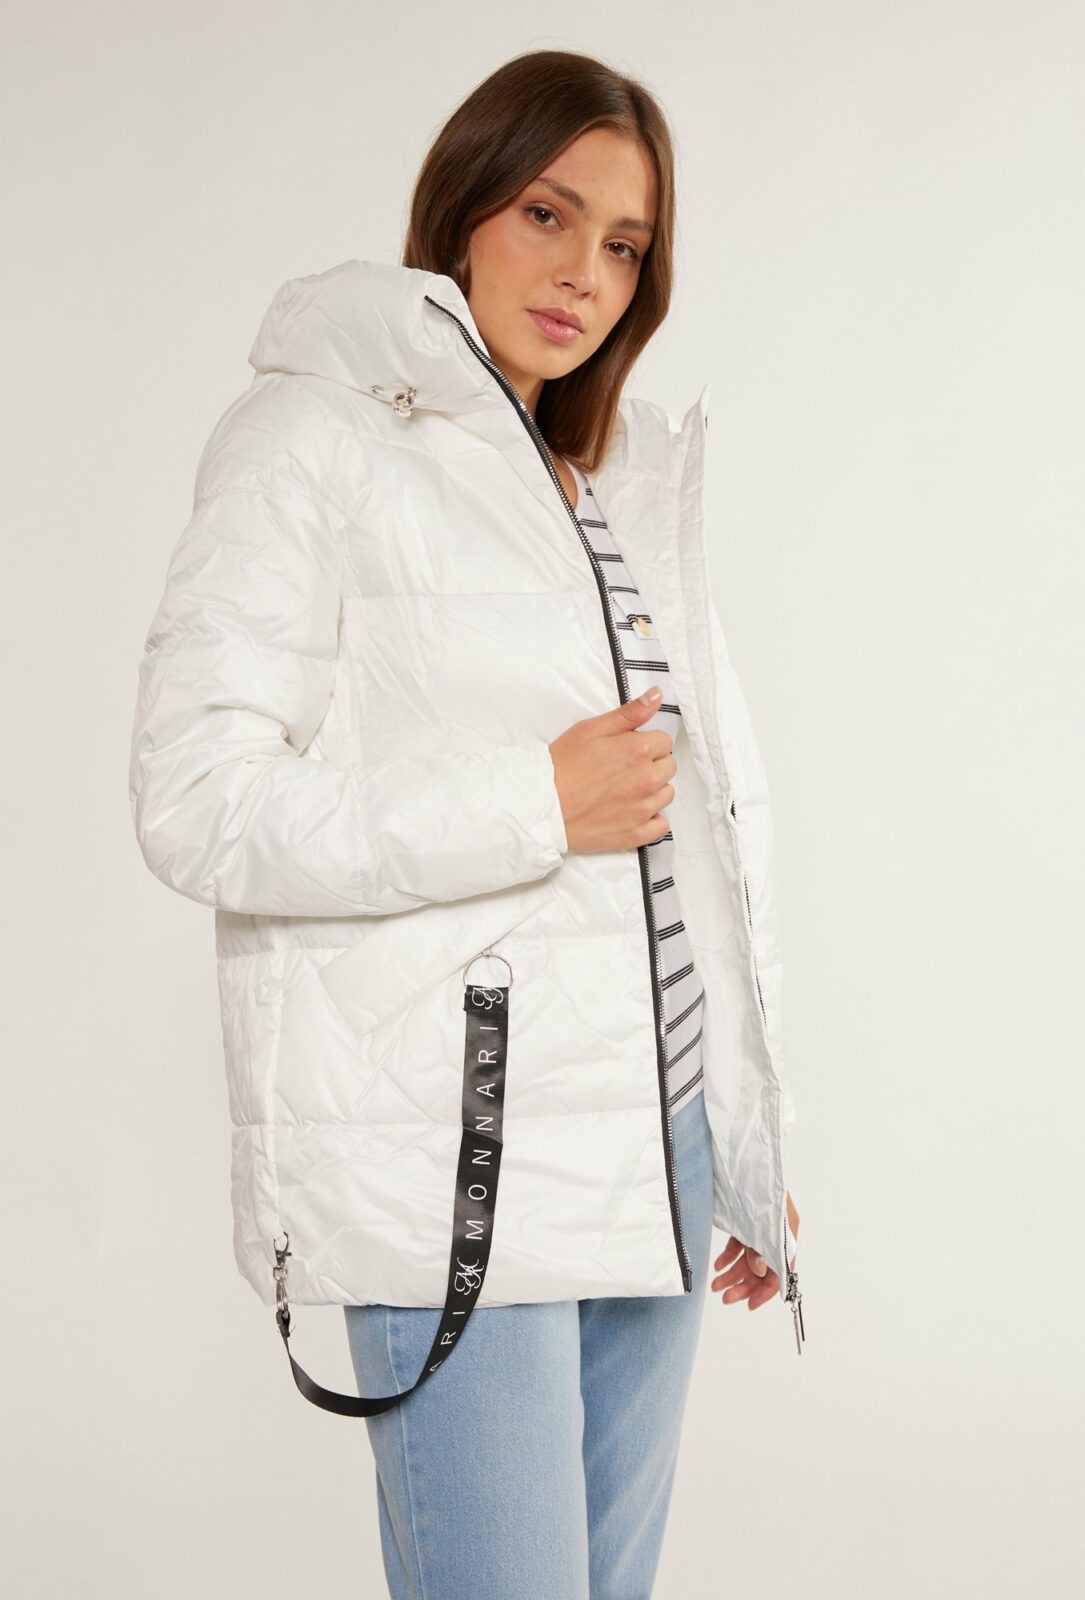 MONNARI Woman's Jackets Quilted